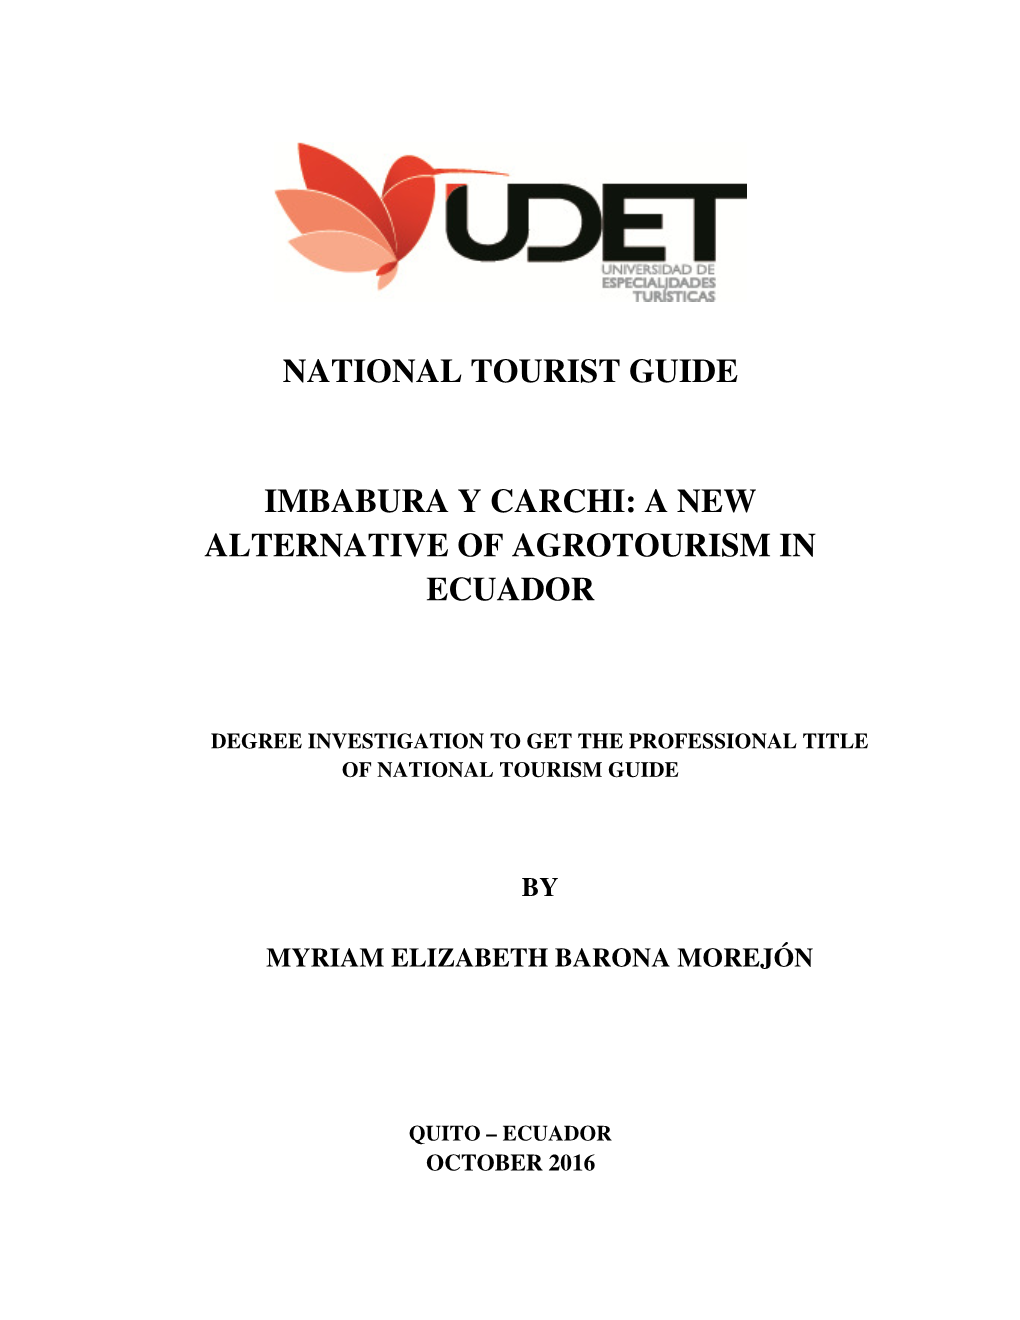 National Tourist Guide Imbabura Y Carchi: a New